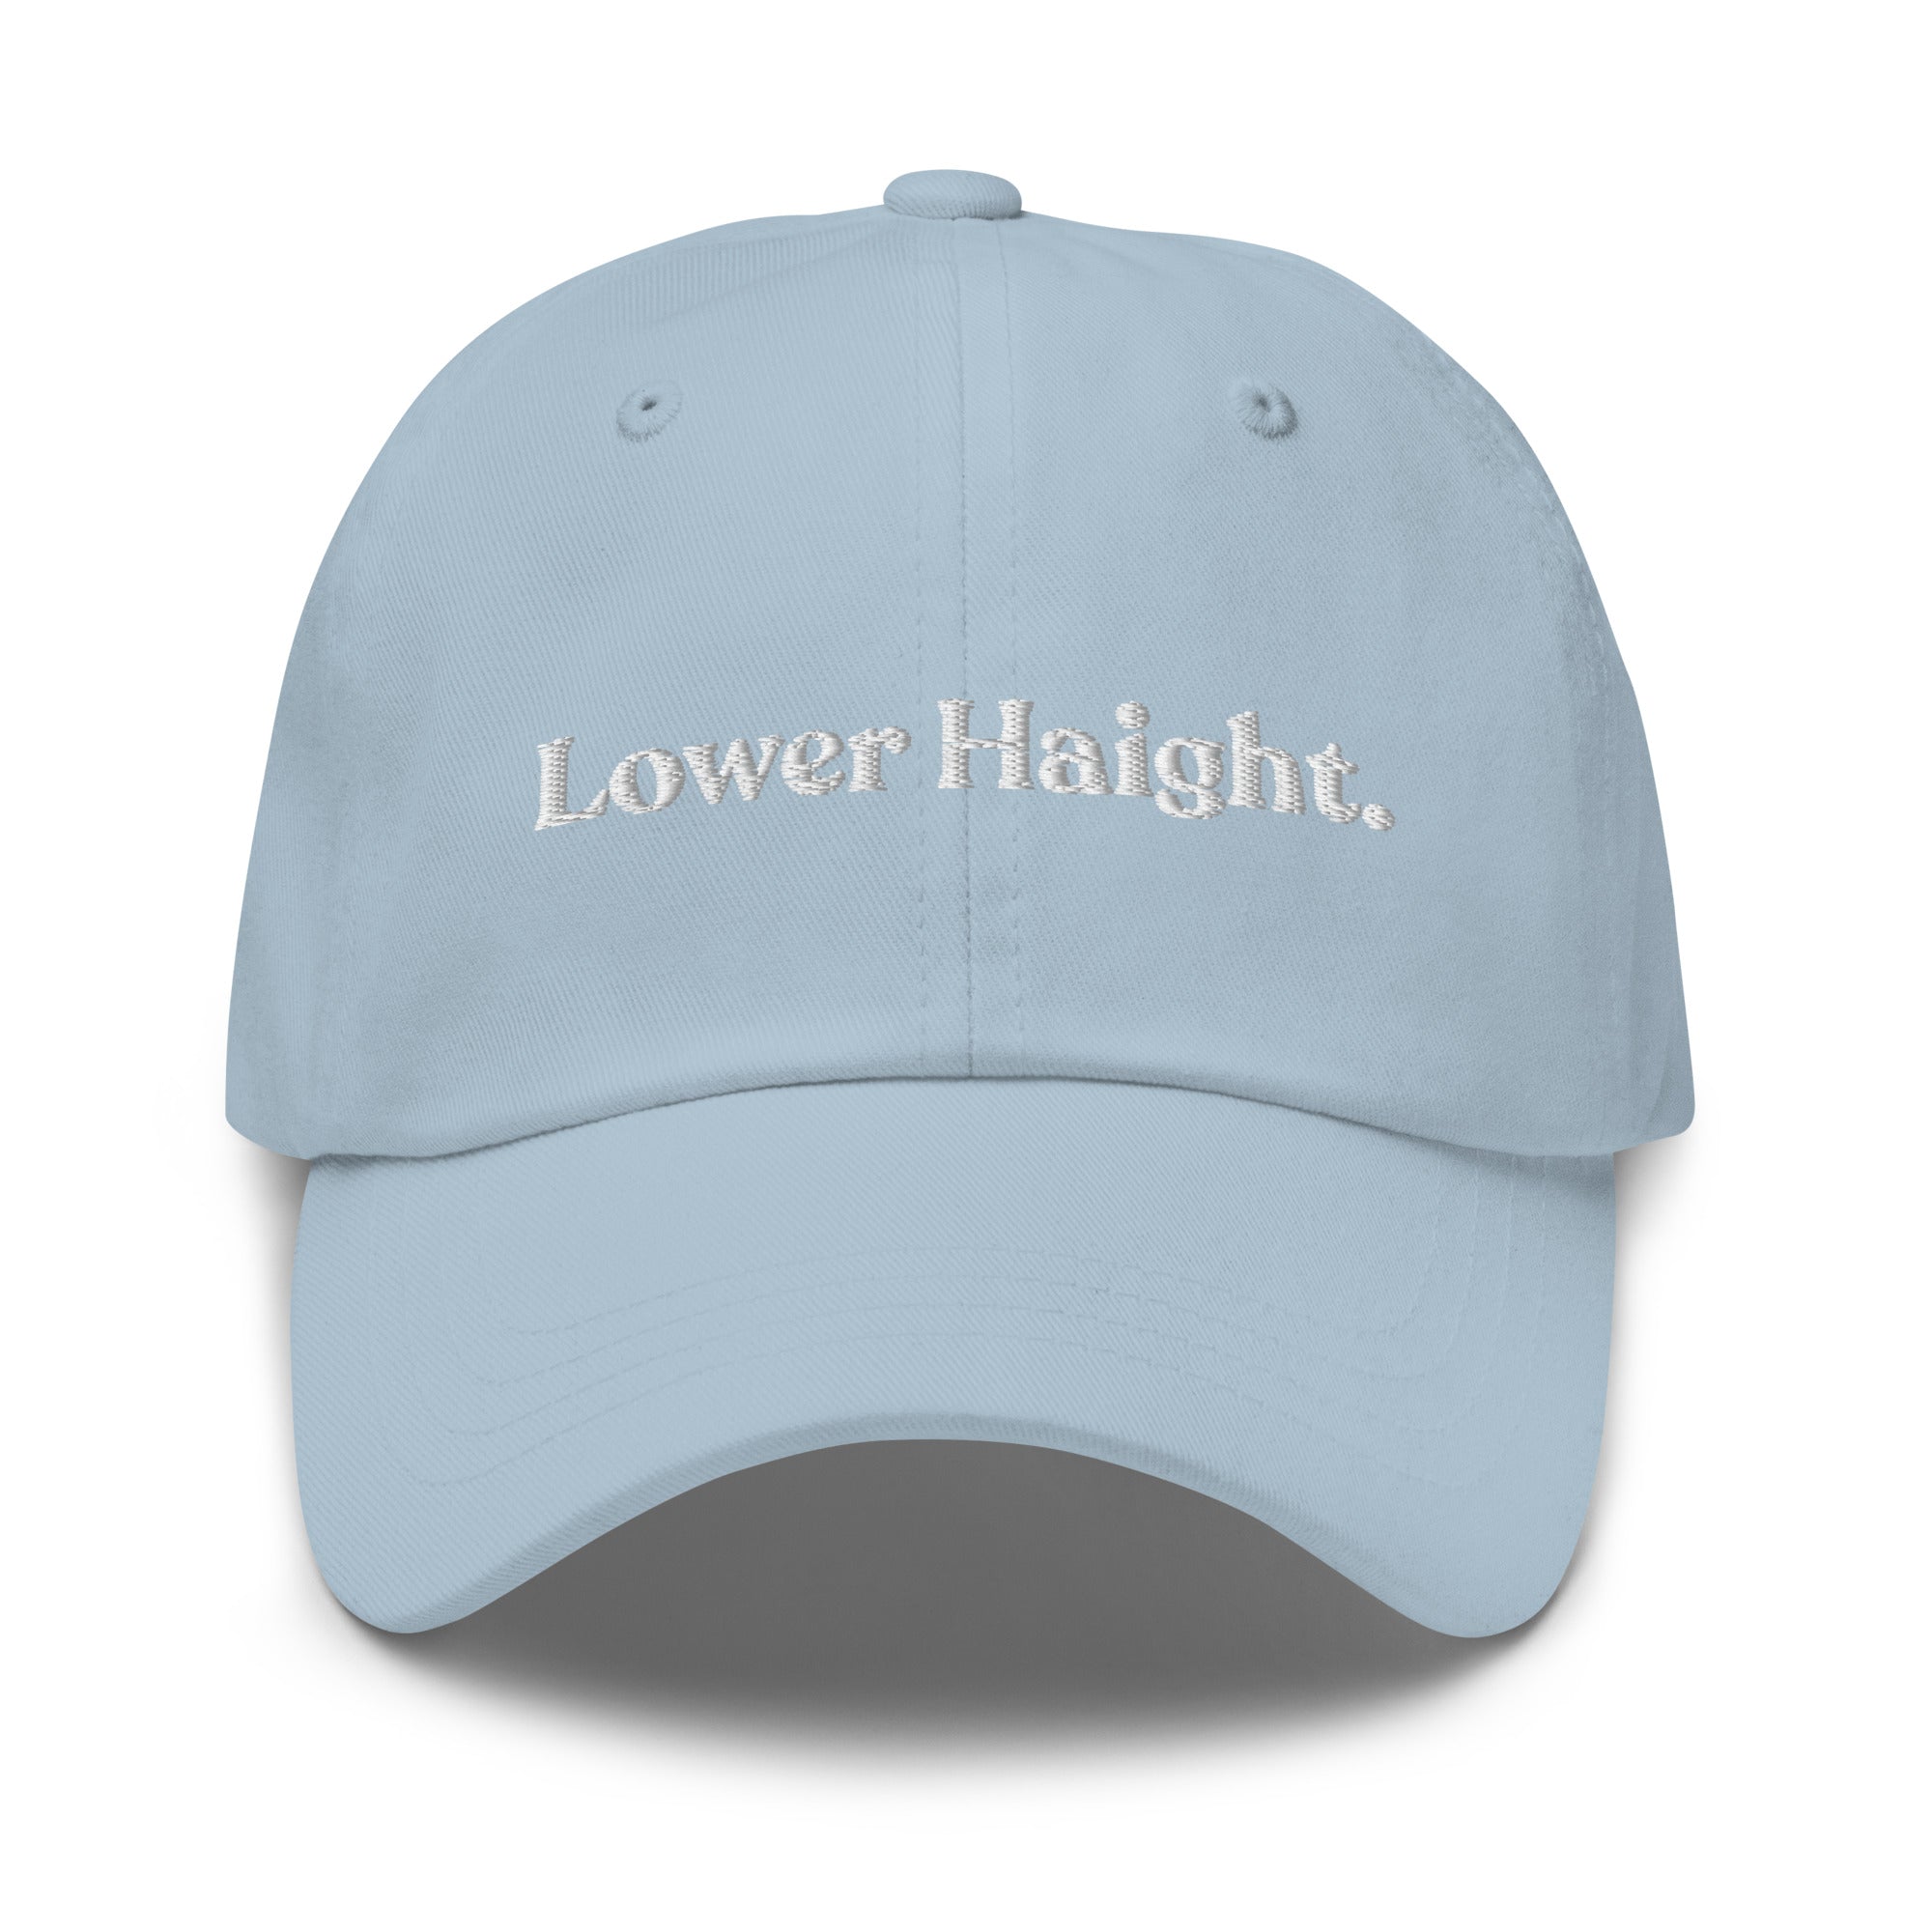 Classic Dad Hat - Lower Haight | San Francisco, CA